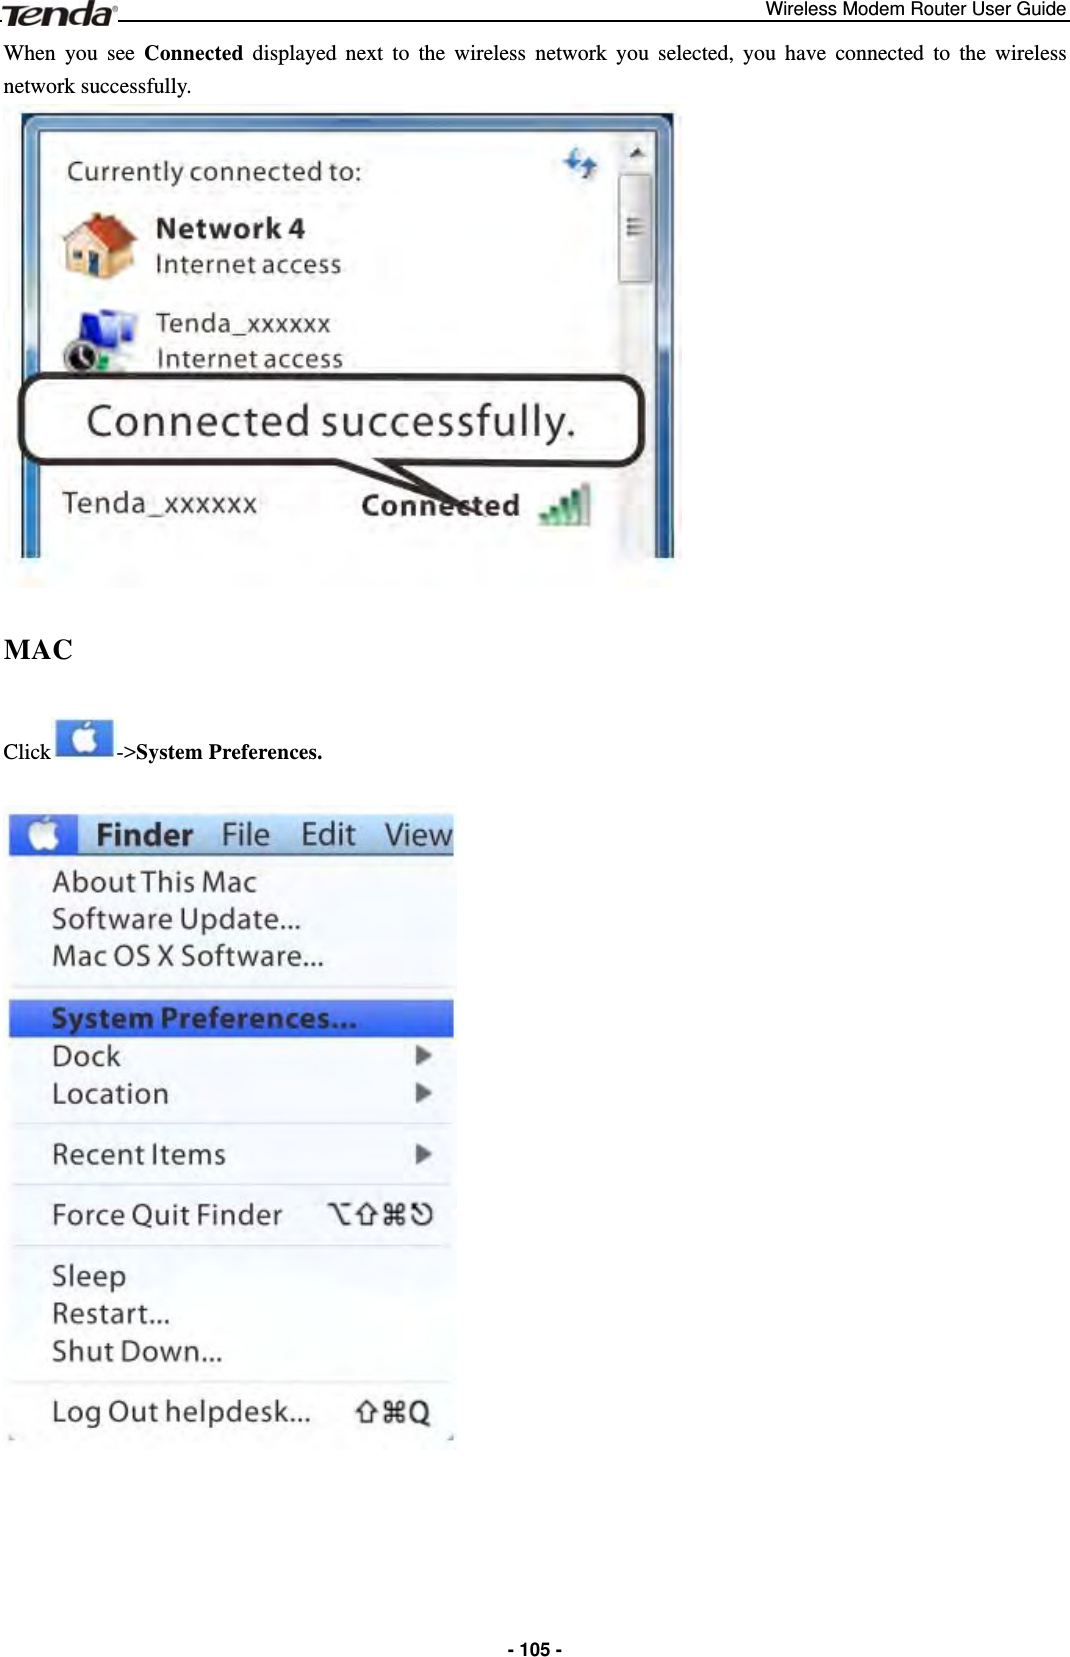 Wireless Modem Router User Guide  - 105 -When you see Connected displayed next to the wireless network you selected, you have connected to the wireless network successfully.   MAC Click -&gt;System Preferences.  